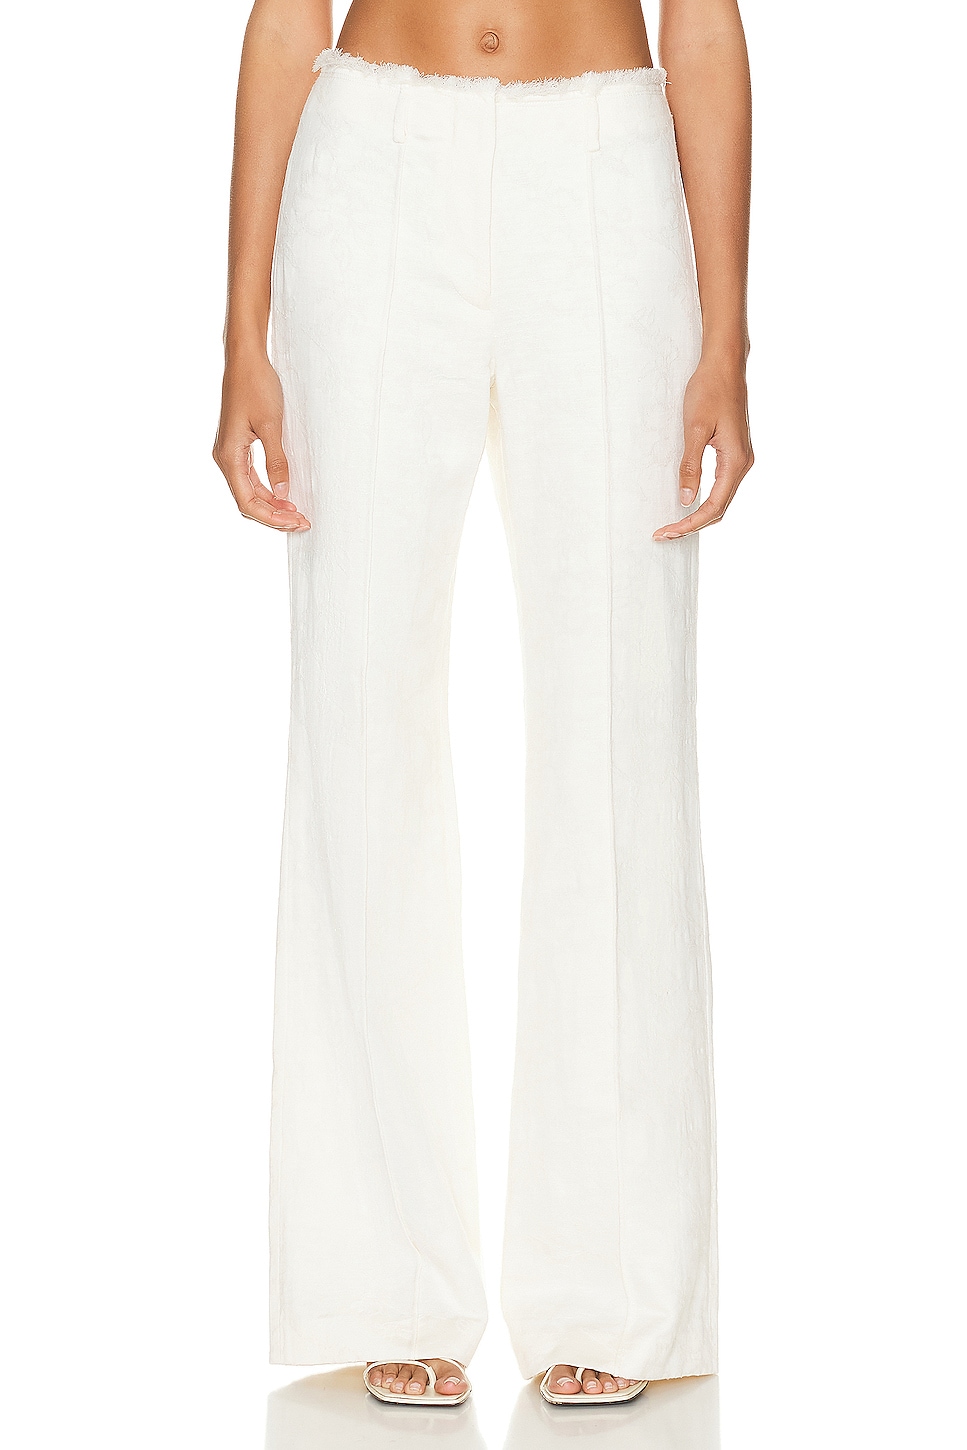 Image 1 of Alexis Stevi Pant in Ivory